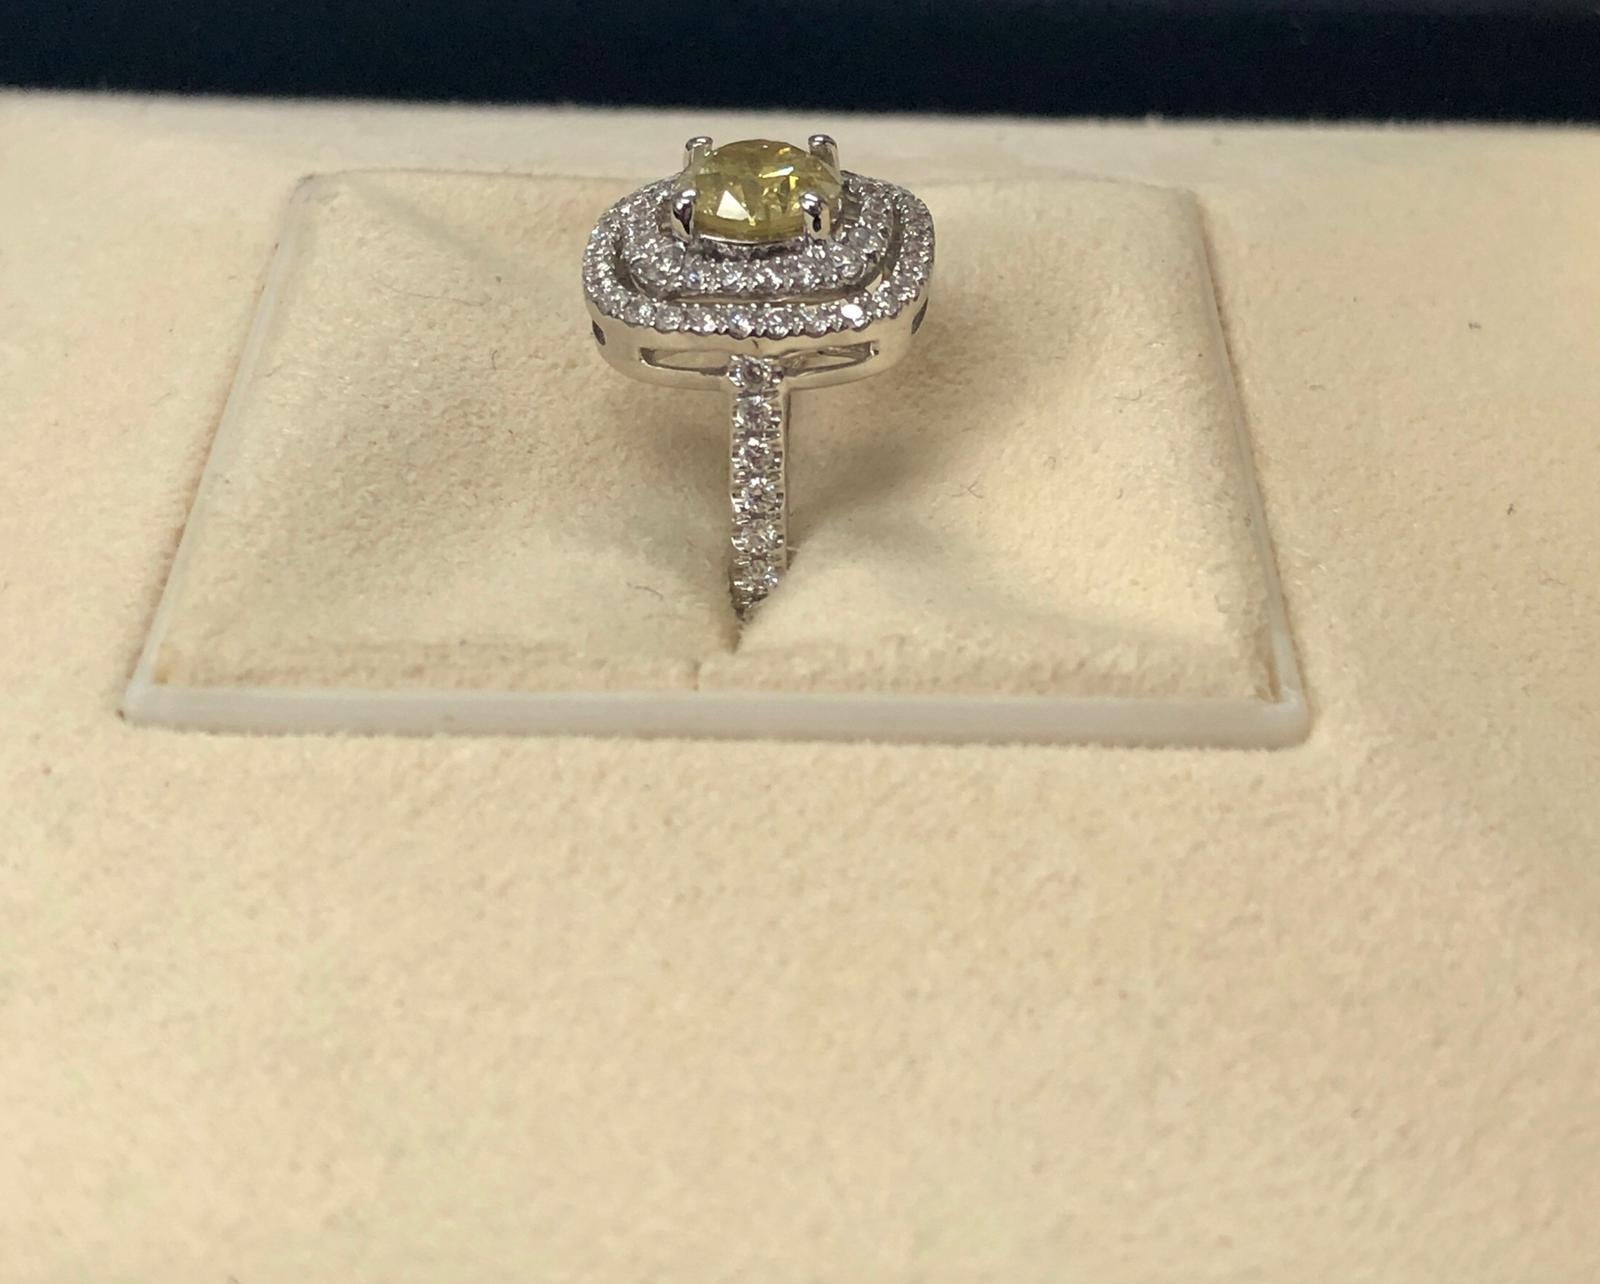 Fancy intense yellow natural round diamond weighing 1.00 carats by GIA. Set in a double row white diamonds halo setting. Its transparency and luster are excellent. 18K white gold, this pear ring is the ultimate gift for anniversaries, birthdays, and